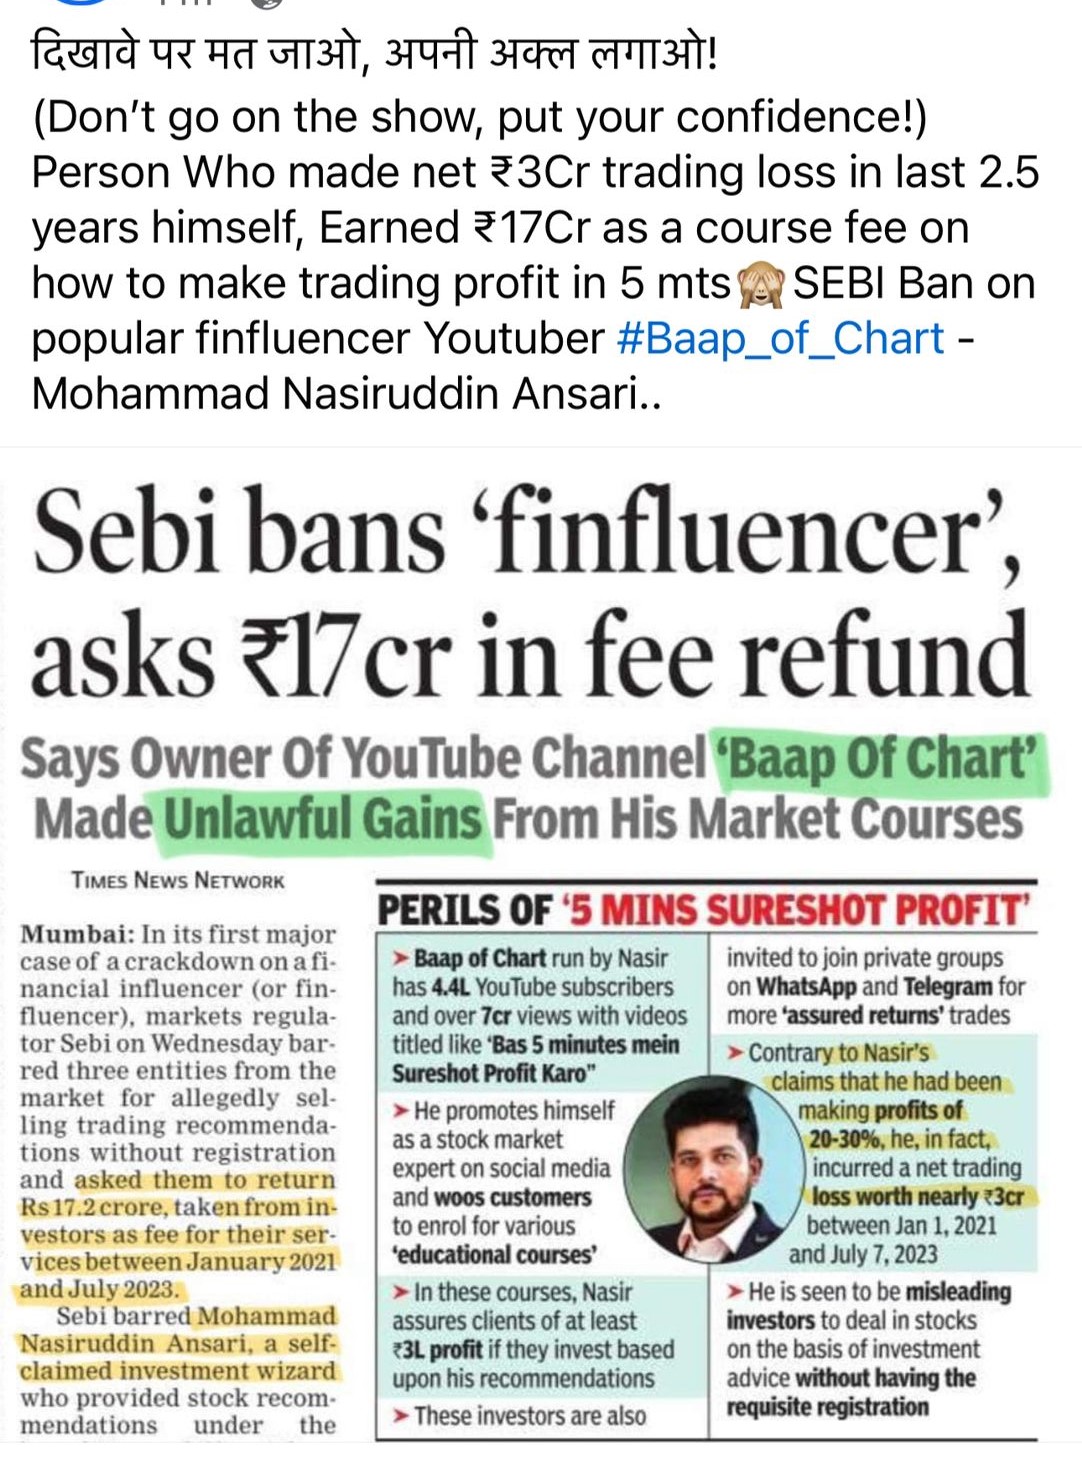 Sebi Ban with fines ' Mohammad Ansari -youtuber Baap of Chart' Rs 17.2 Cr